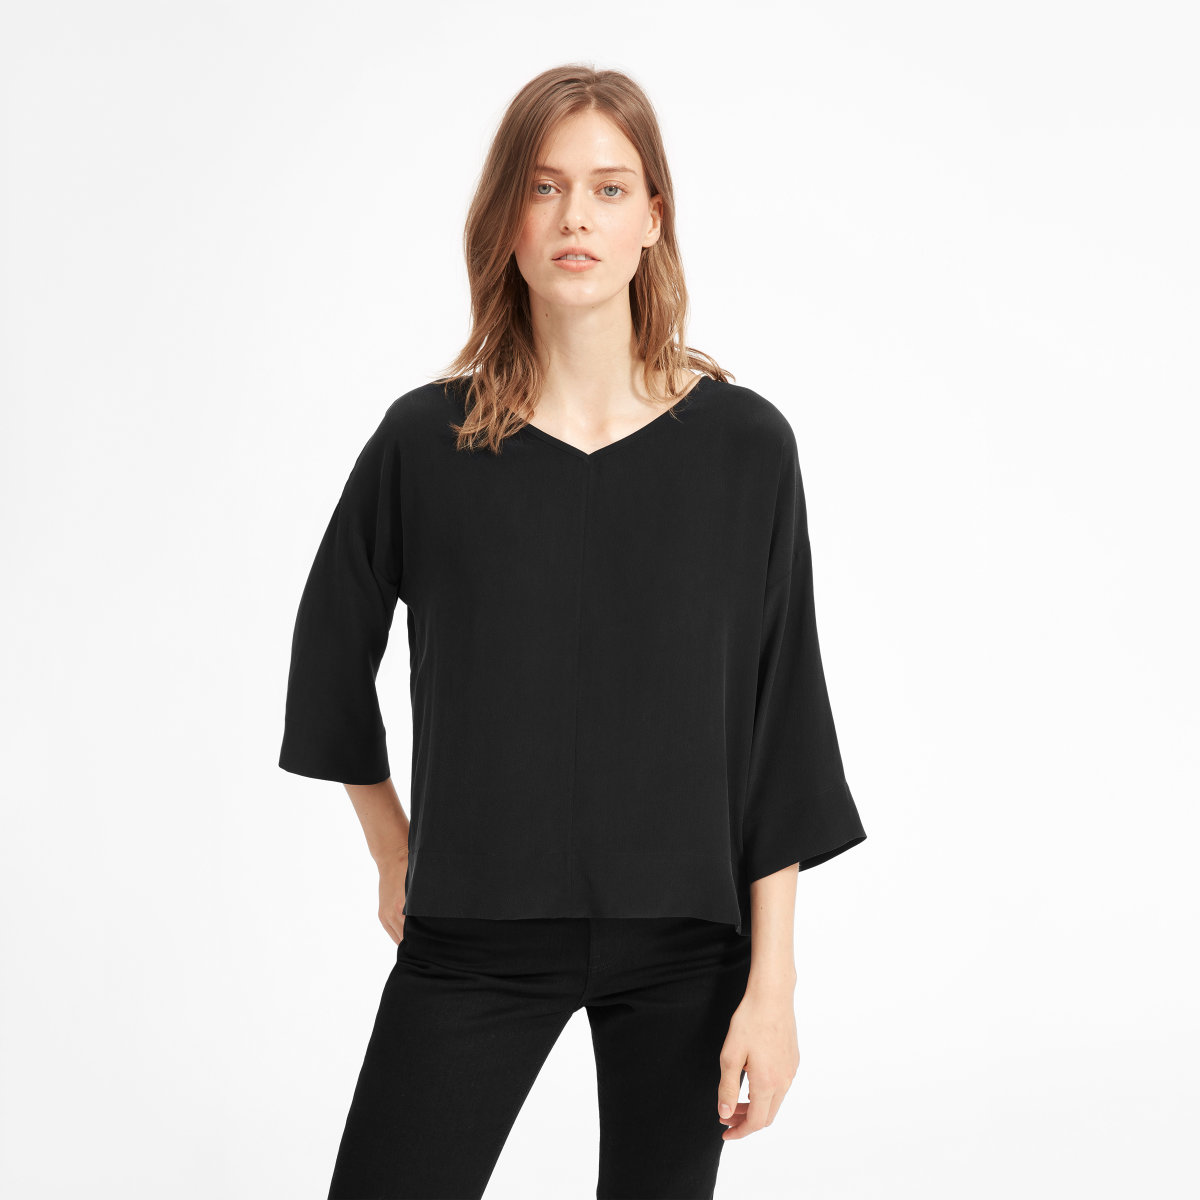 The Clean Silk V-Neck Blouse